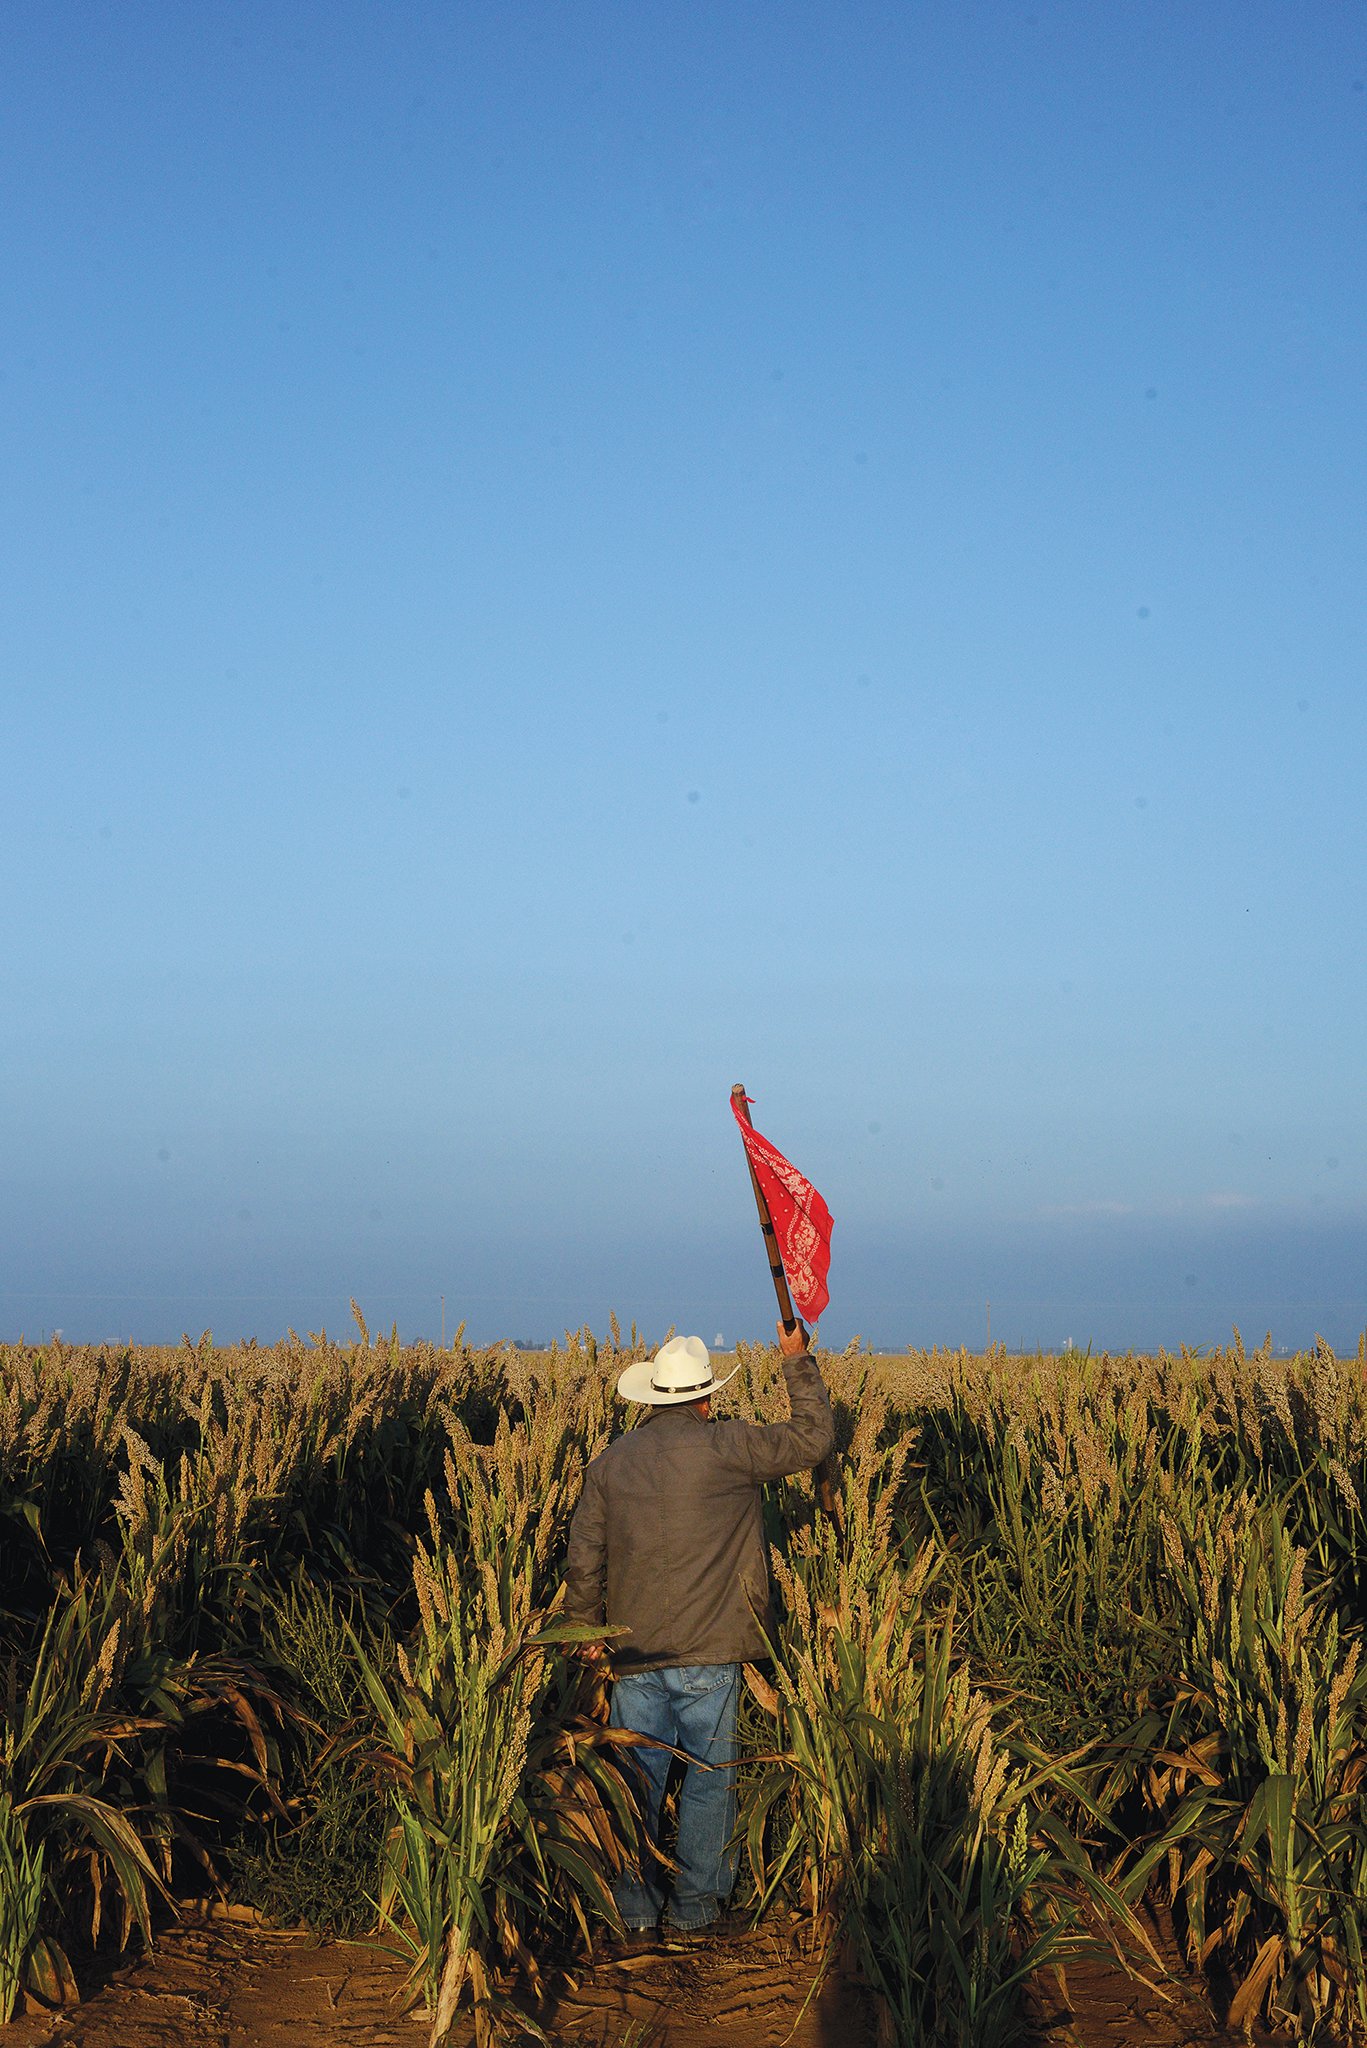 A farmworker waves a red bandana as a visual marker for others working sorghum fields in Plainview.